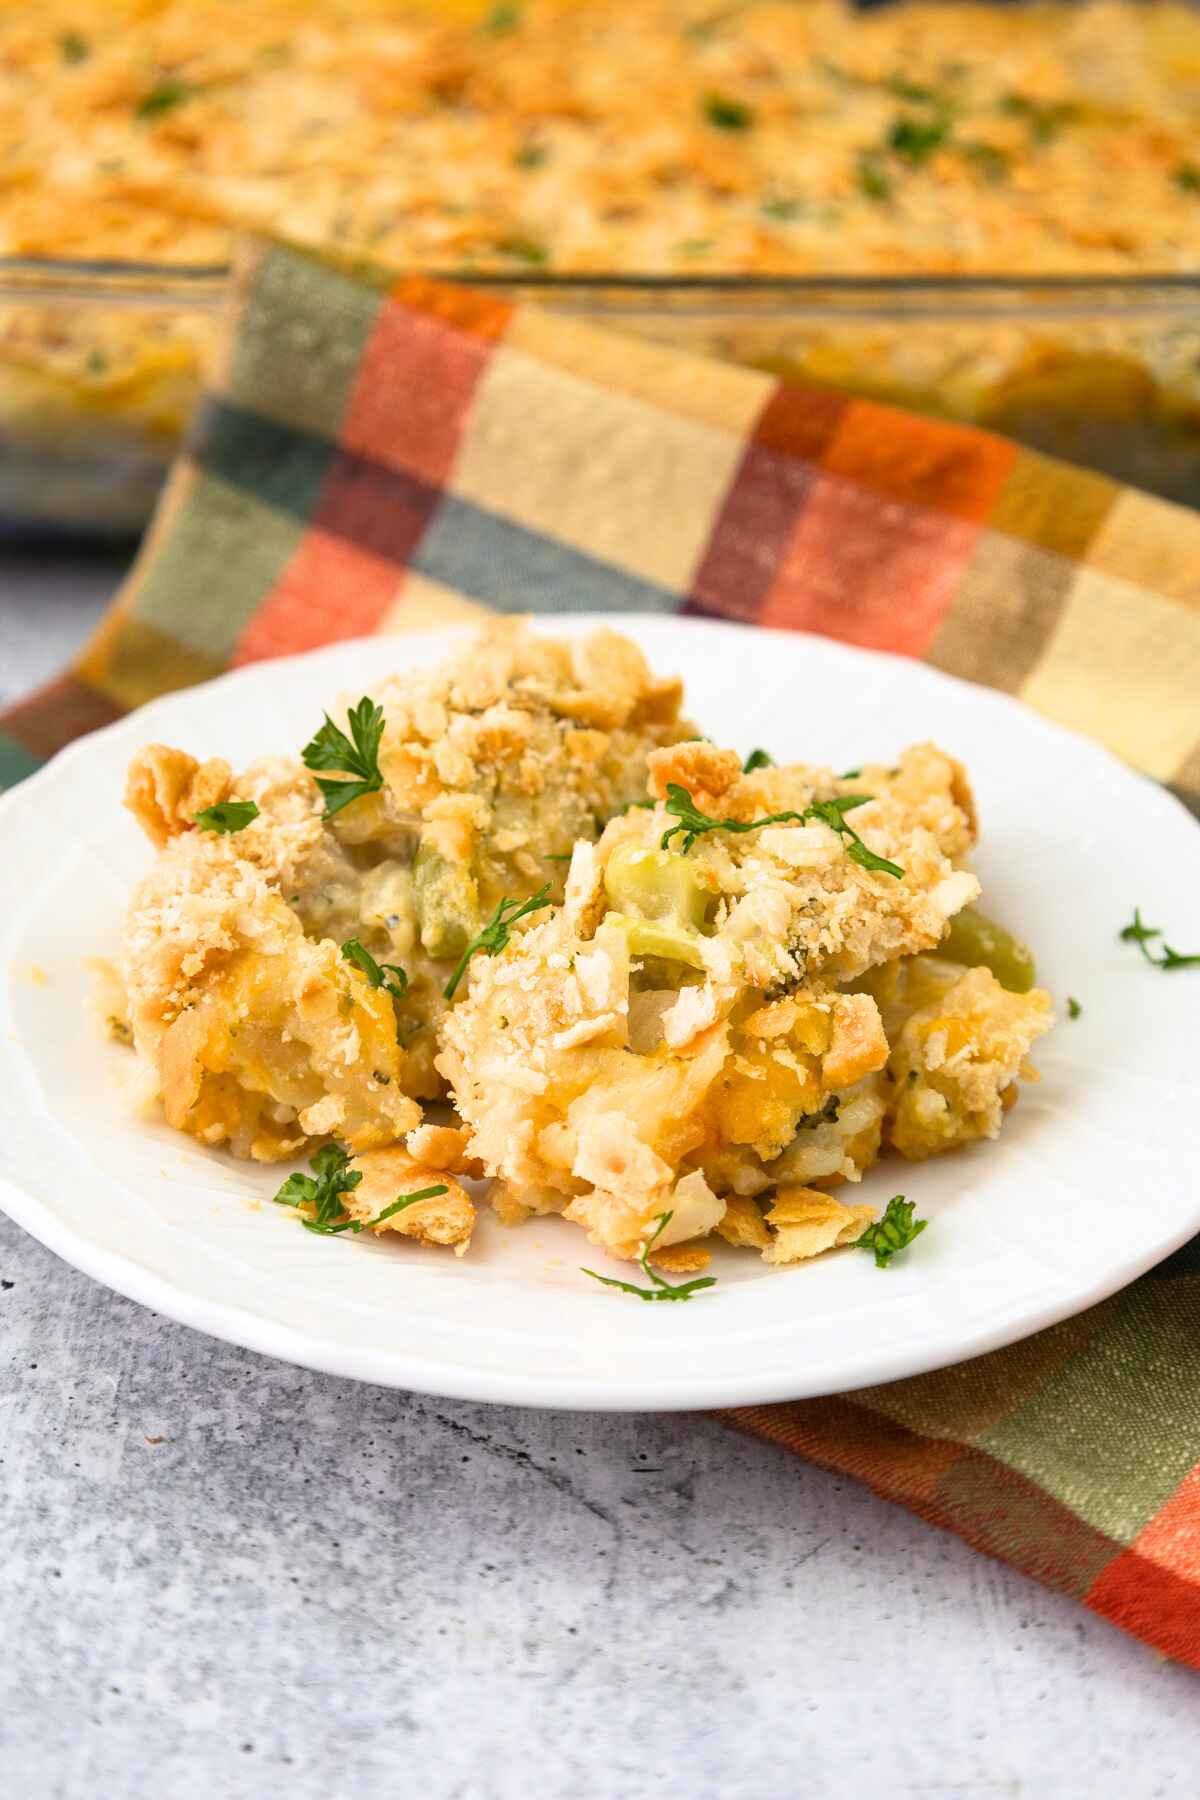 Side view of cheesy chicken broccoli rice casserole recipe on a white plate with blurred image of casserole dish in the background.